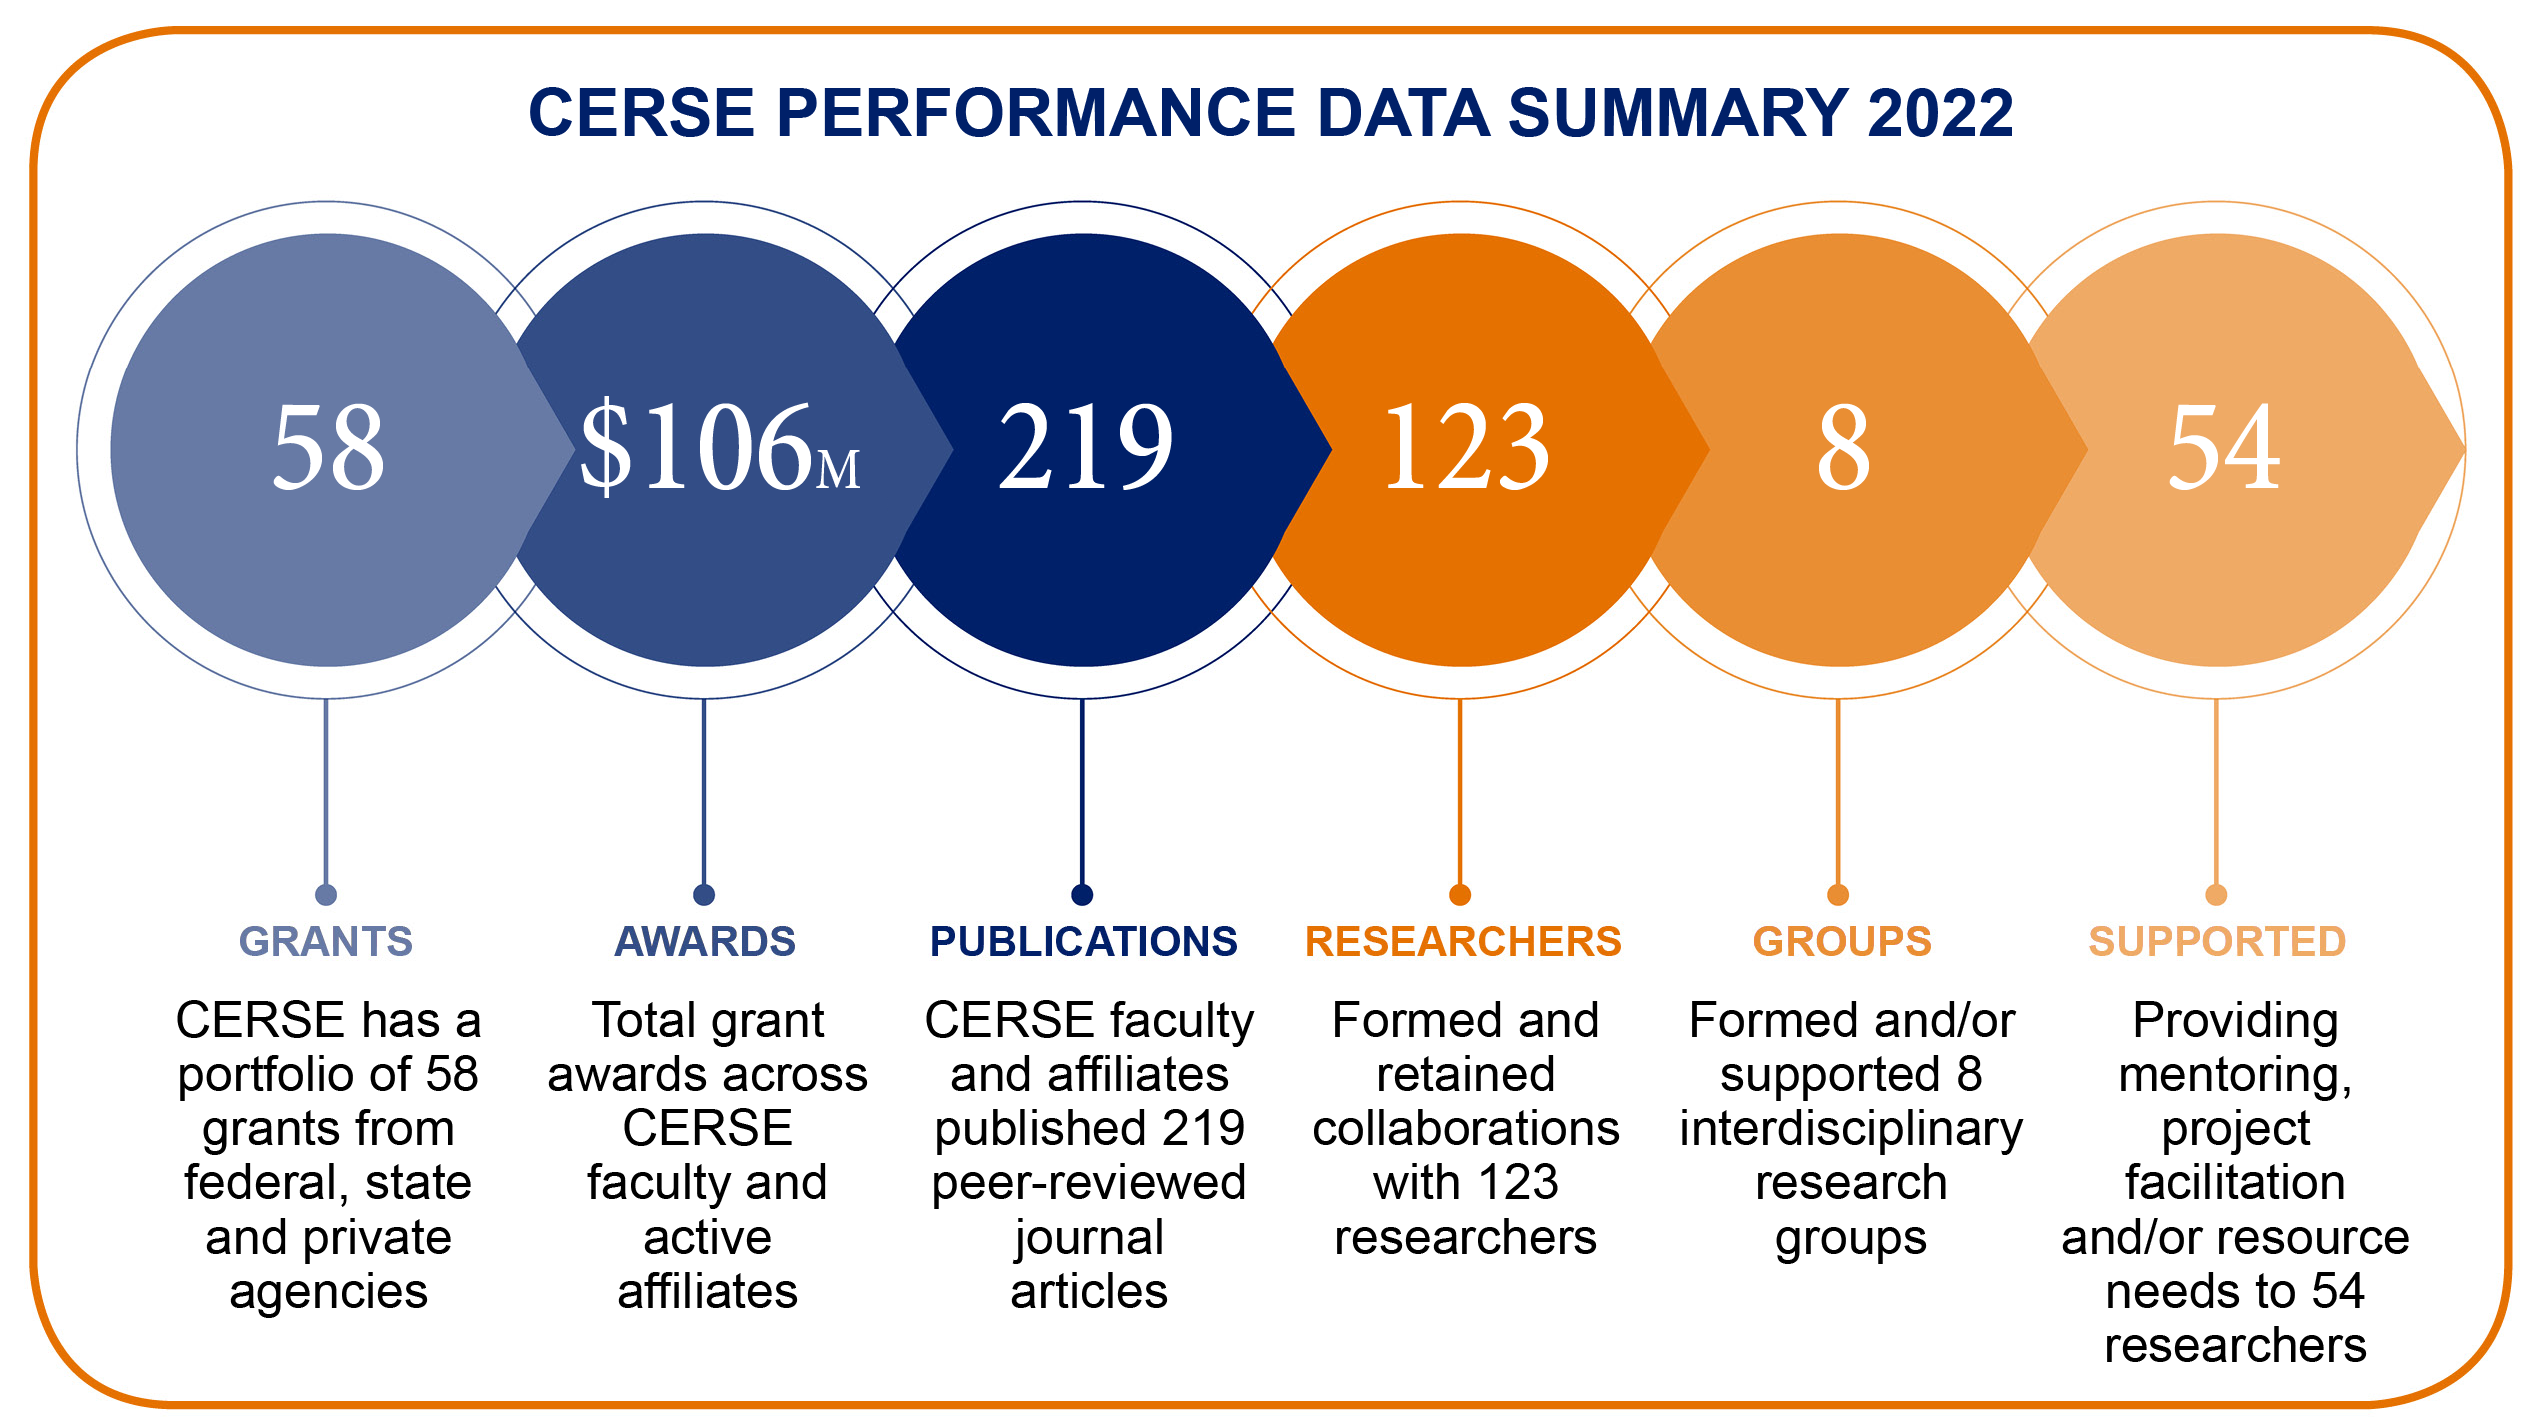 2022 CERSE accomplishments infographic showing $106 million in funding and 219 publications.